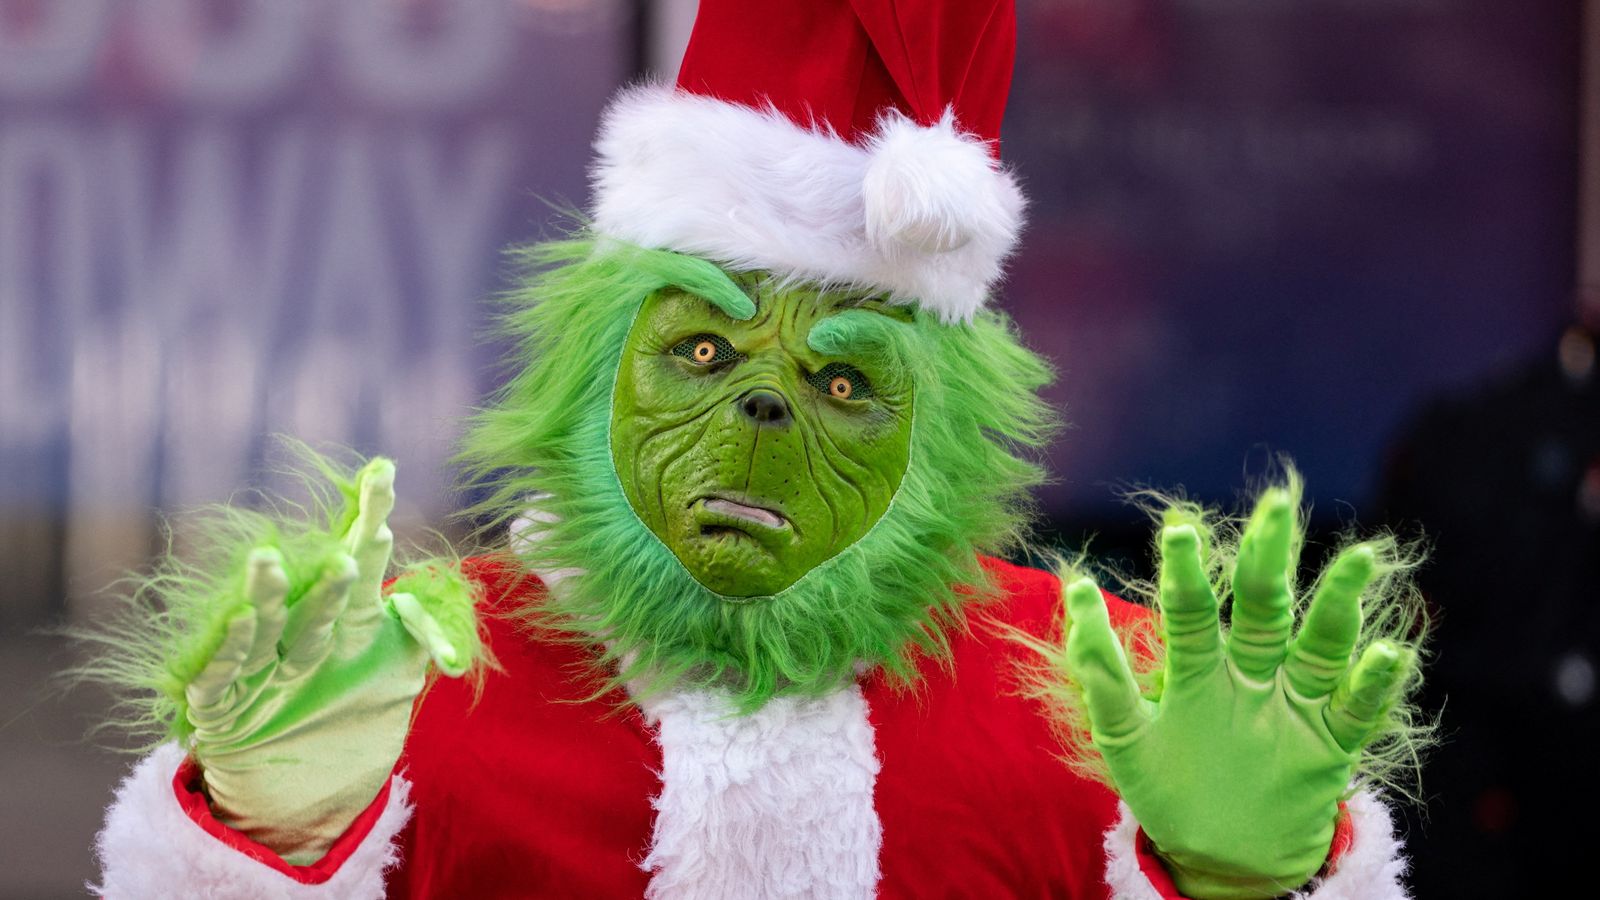 Teaching assistant loses religious discrimination claim over Christmas Grinch award